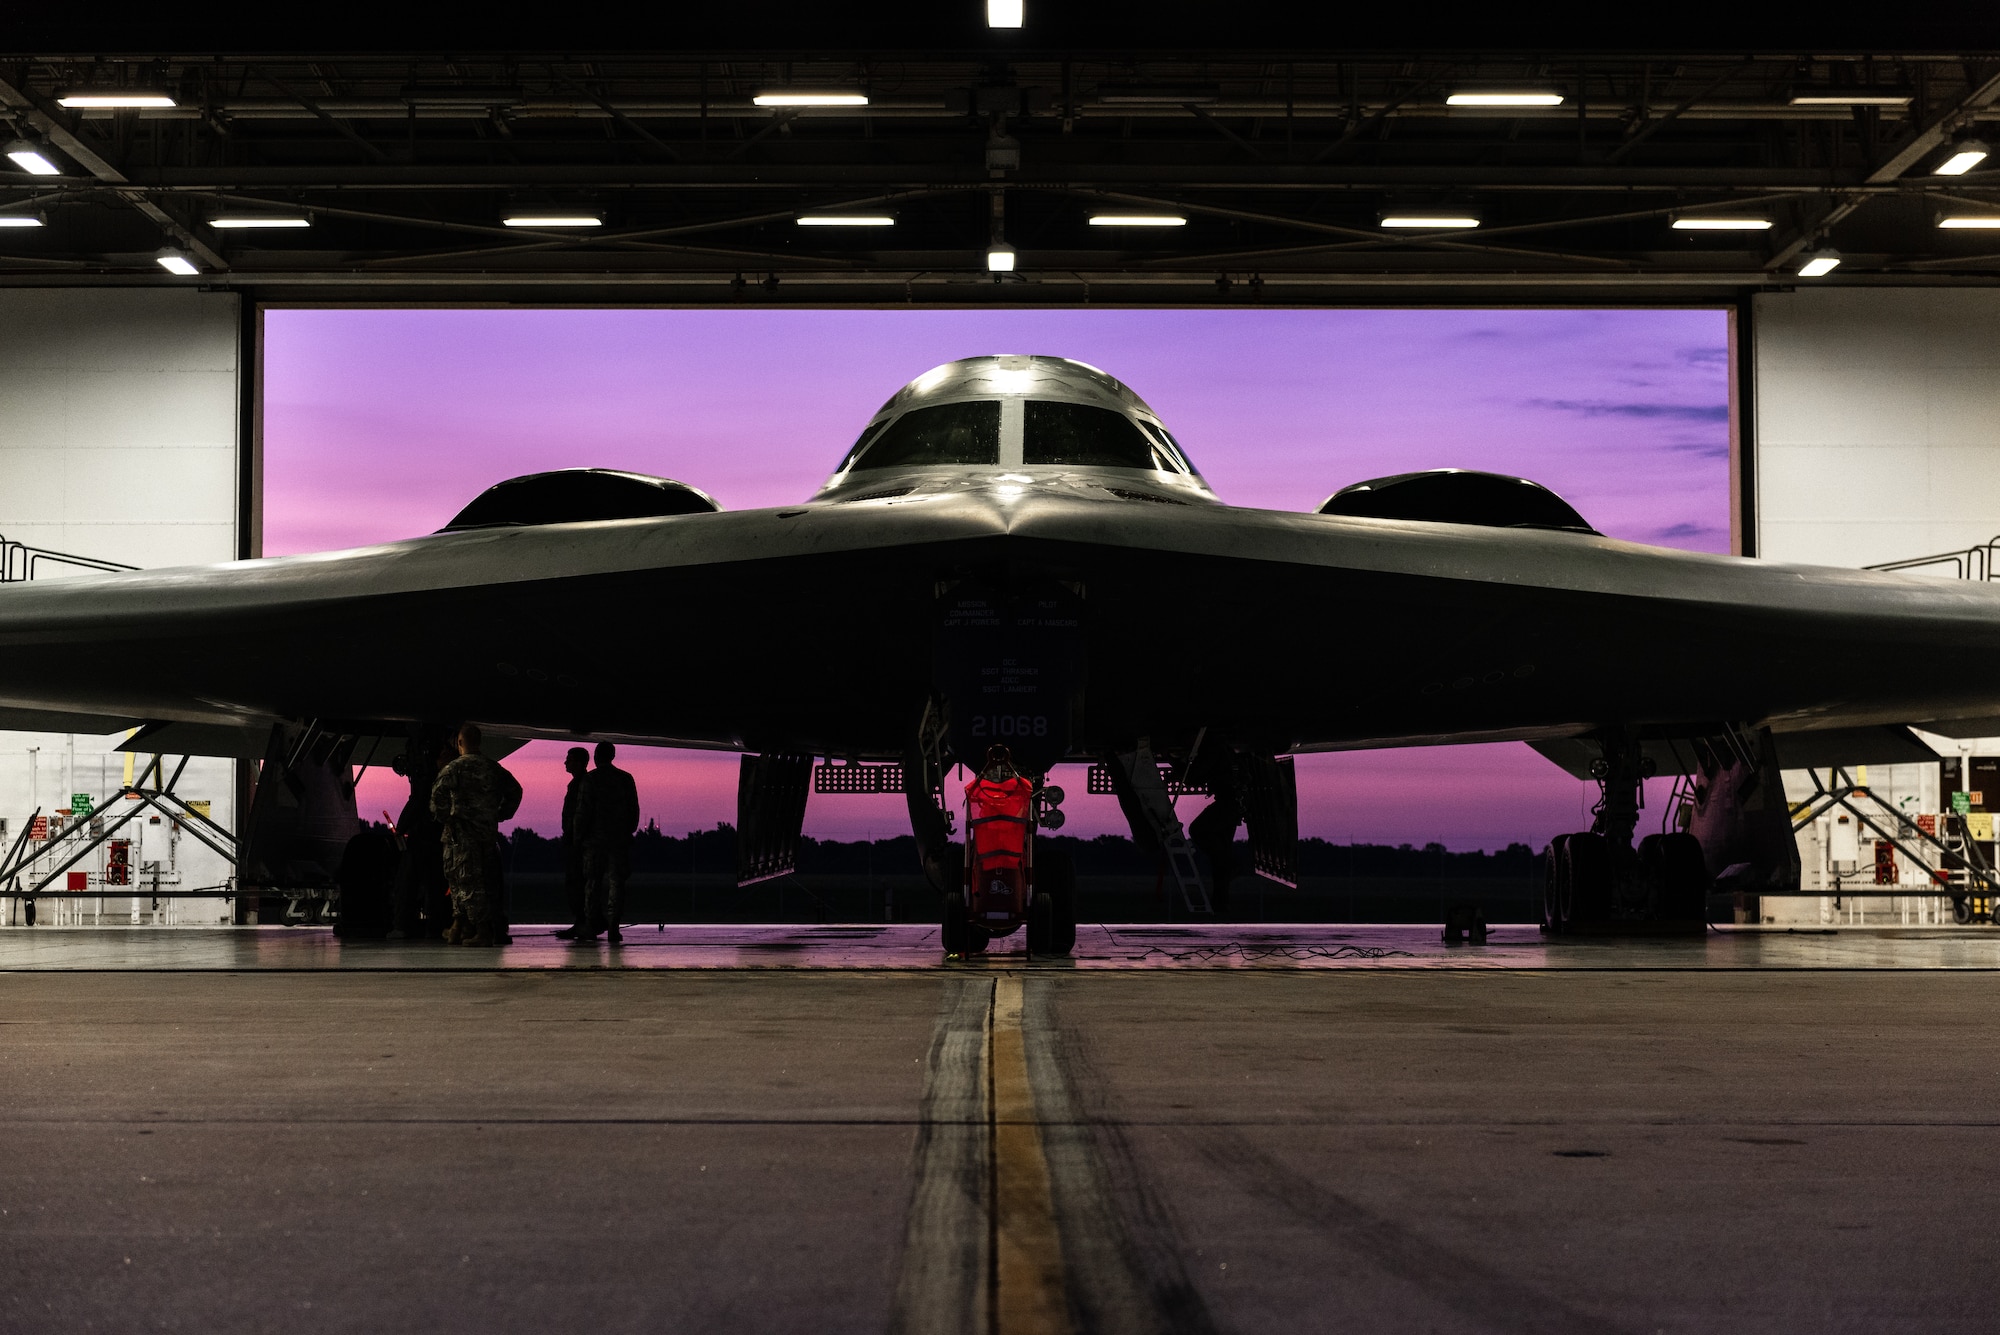 A B-2 Spirit is prepped for launch in a flight line dock on July 17, 2019, at Whiteman Air Force Base, Missouri. Whiteman AFB is celebrating the 30th anniversary of the inaugural flight of the B-2 in 1989. (U.S. Air Force photo by Senior Airman Thomas M. Barley)